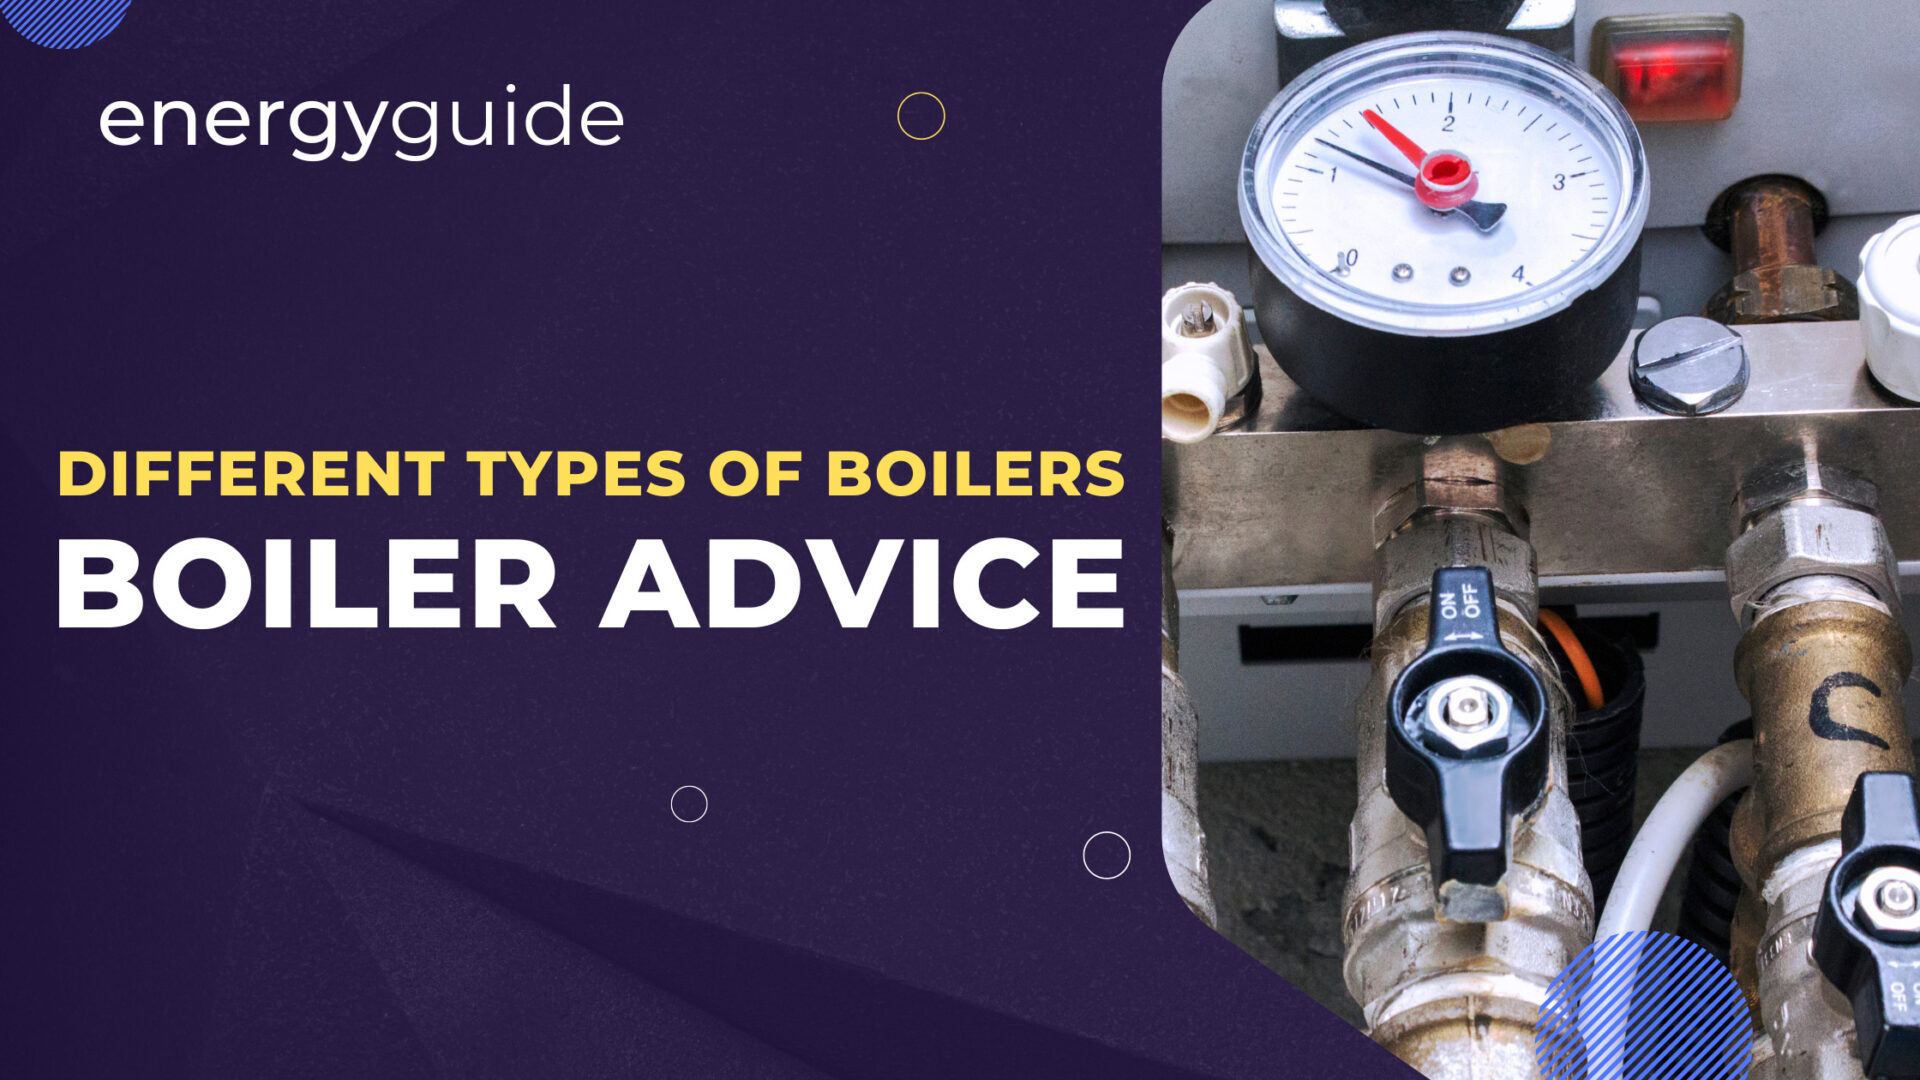 Different types of boilers